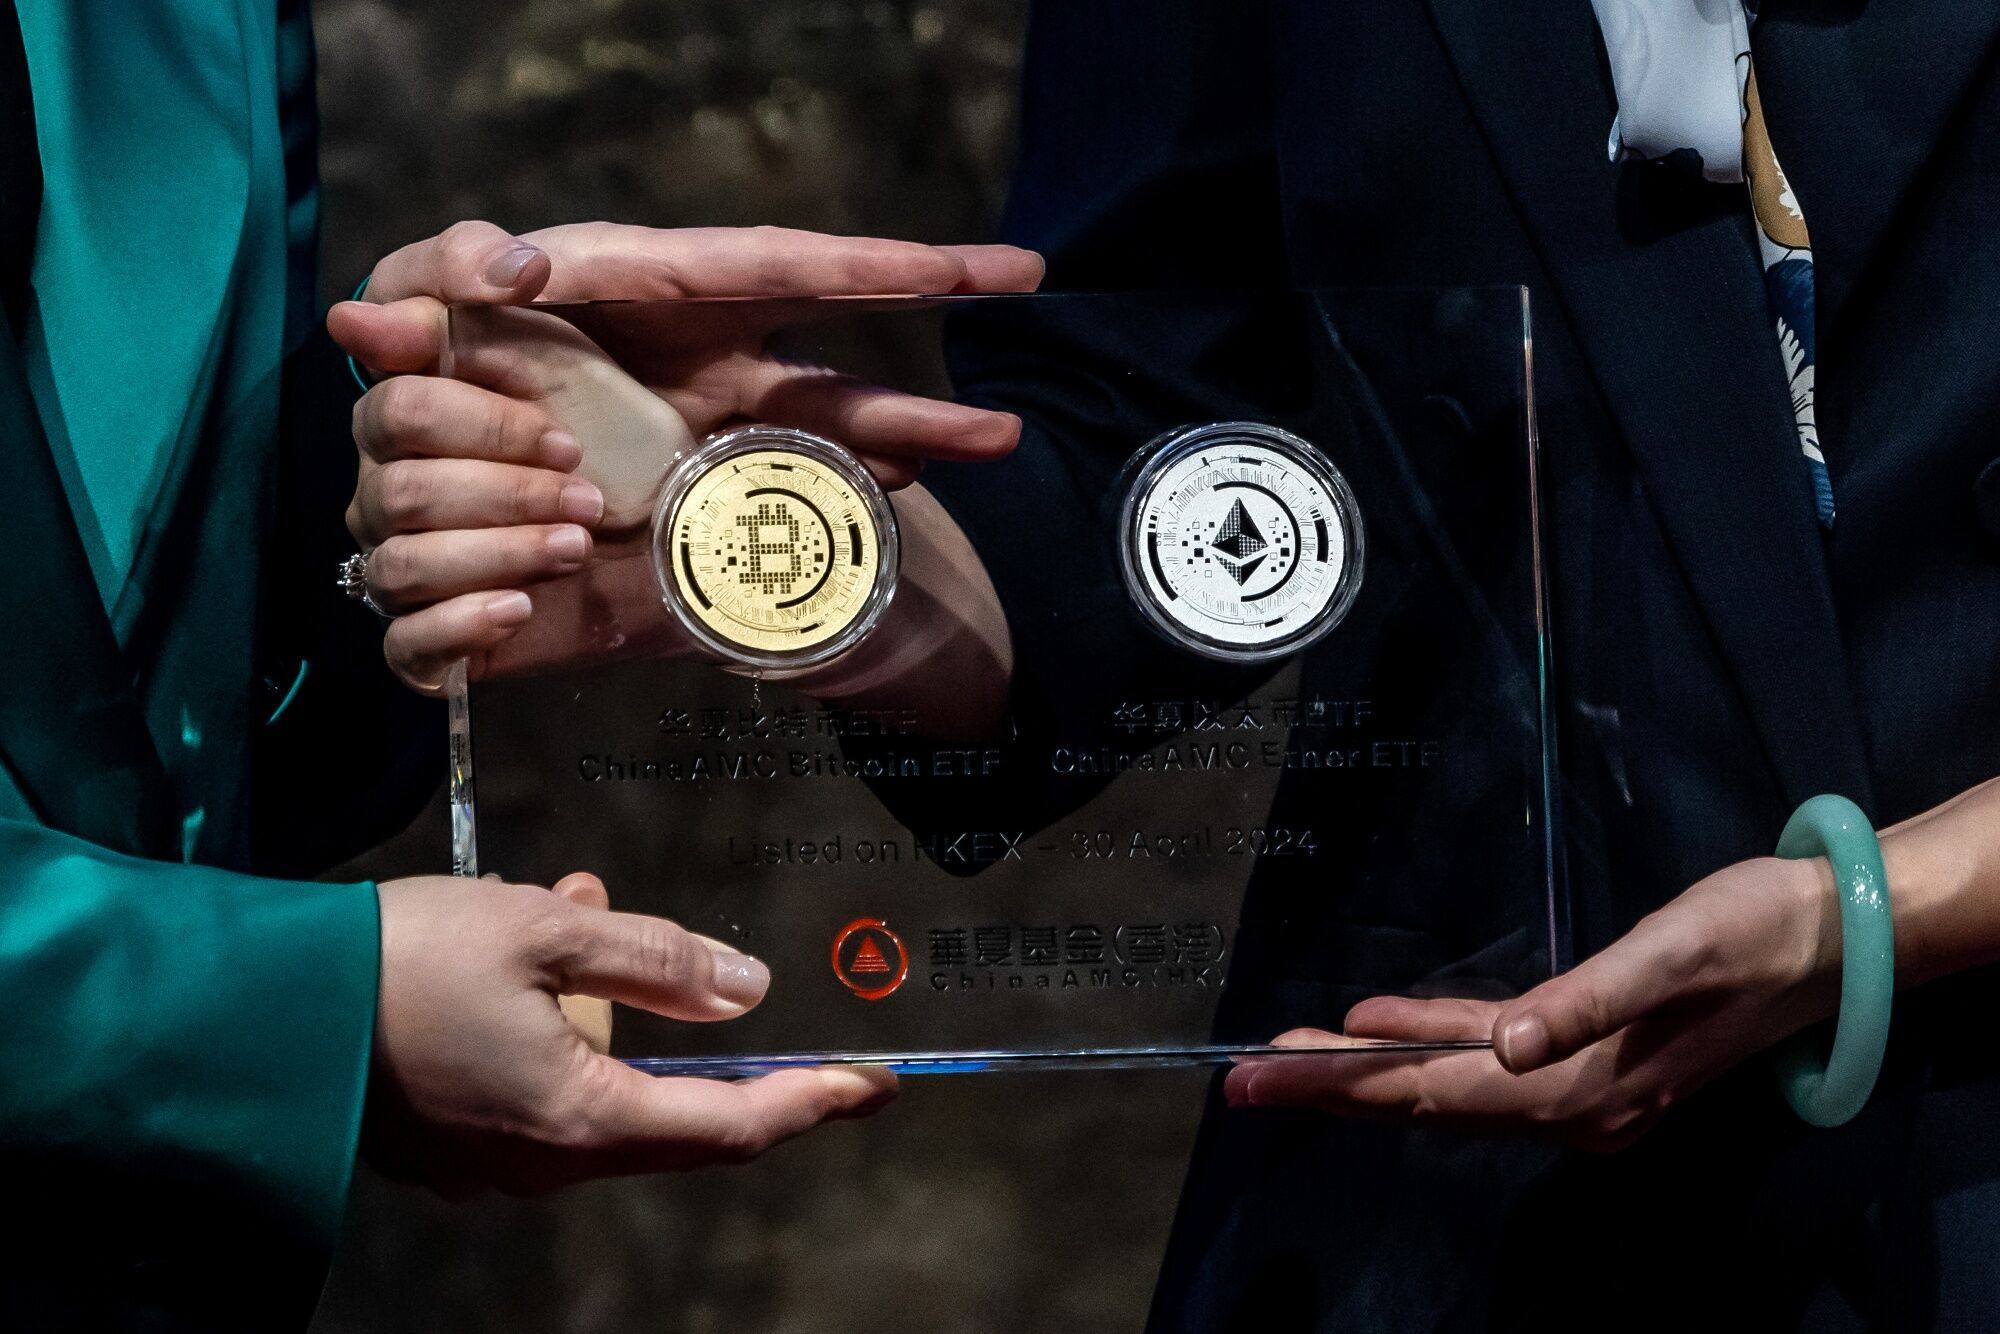 Illustrative bitcoin and ether tokens are held up during the listing ceremony of exchange-traded funds investing directly in cryptocurrency, at the Hong Kong Stock Exchange on April 30. Photo: Bloomberg